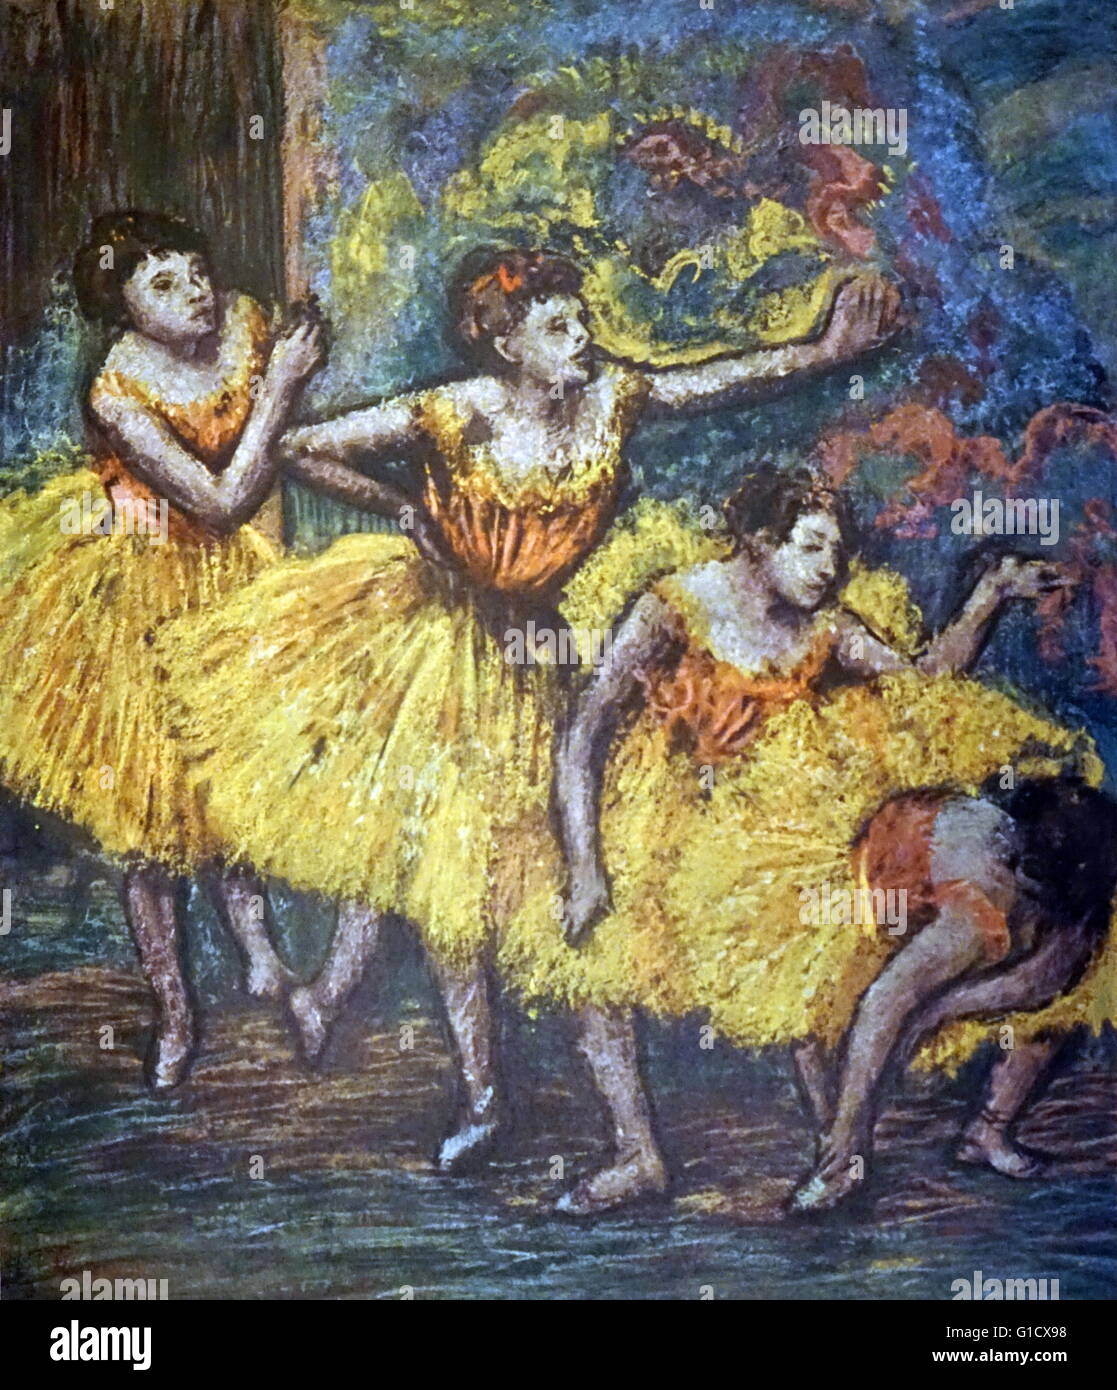 Painting titled 'Four Dancers' by Edgar Degas (1834-1917) a French artist famous for his paintings, sculptures, prints, and drawings. Dated 19th Century Stock Photo